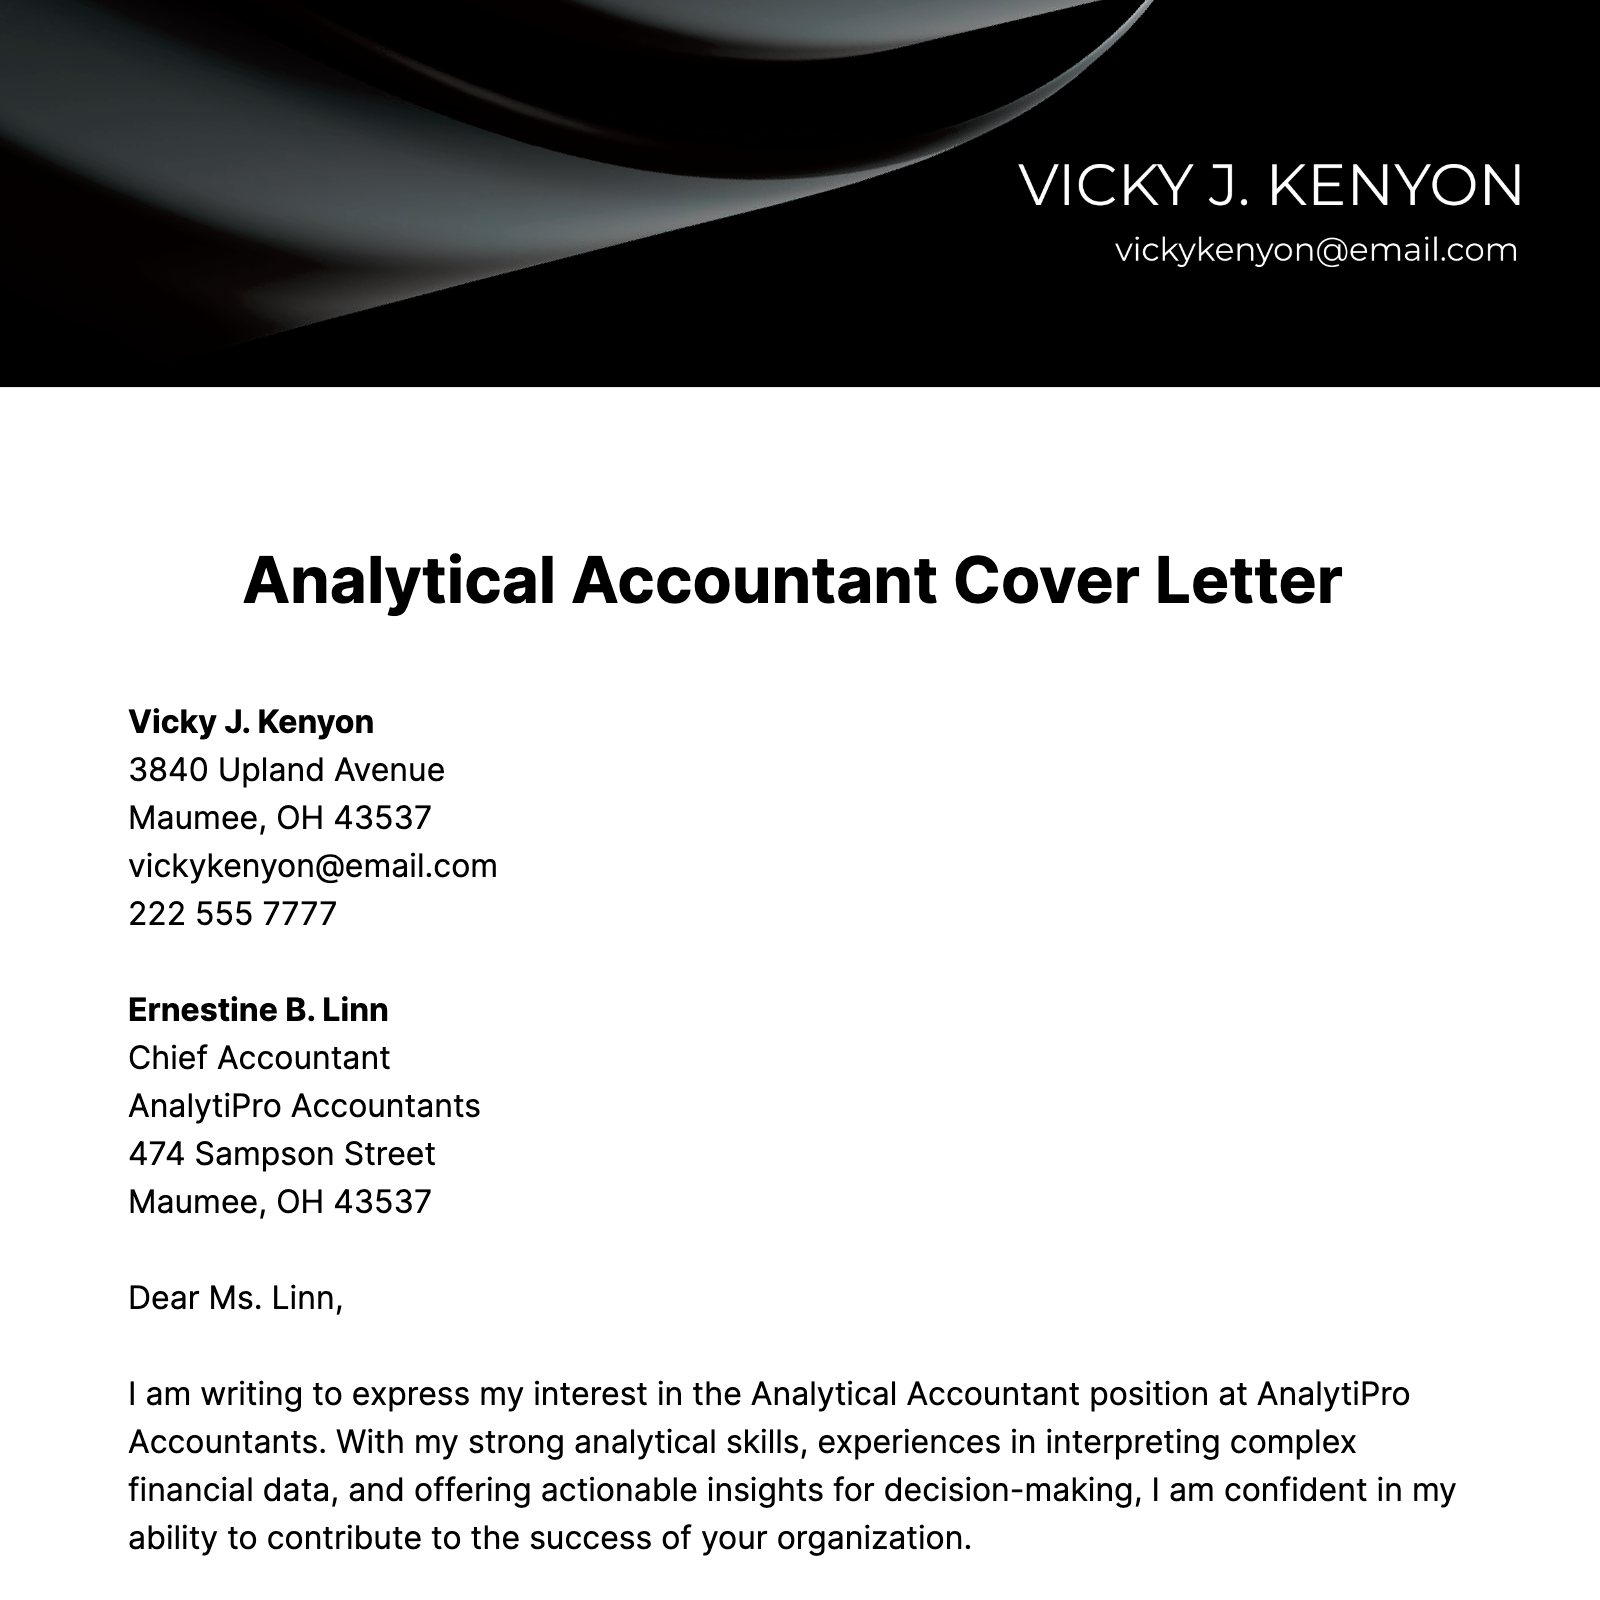 Analytical Accountant Cover Letter Template